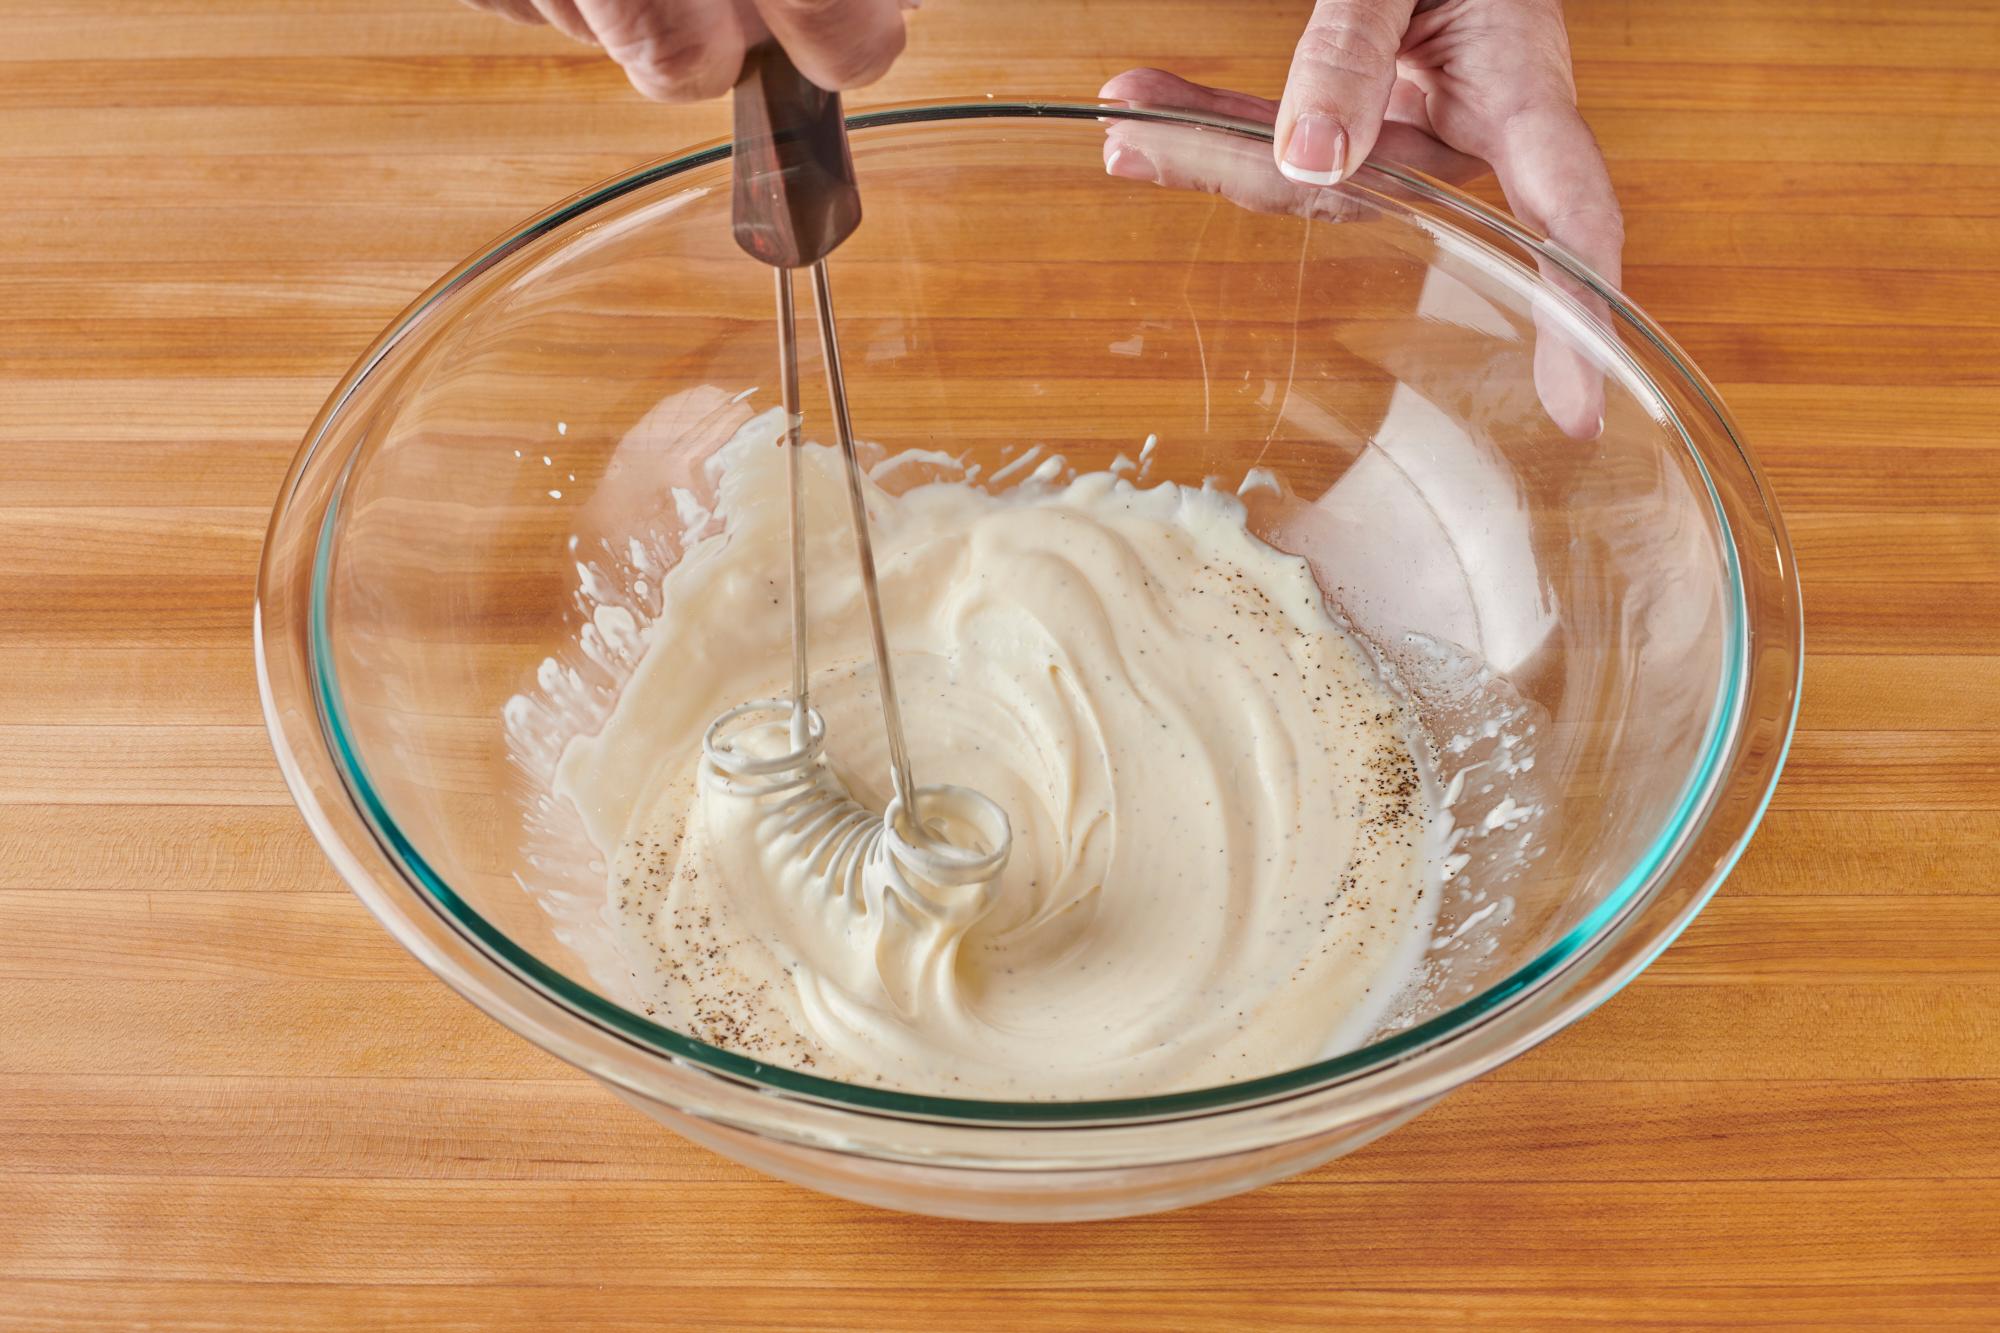 Using a Mix-Stir to whisk the dressing.